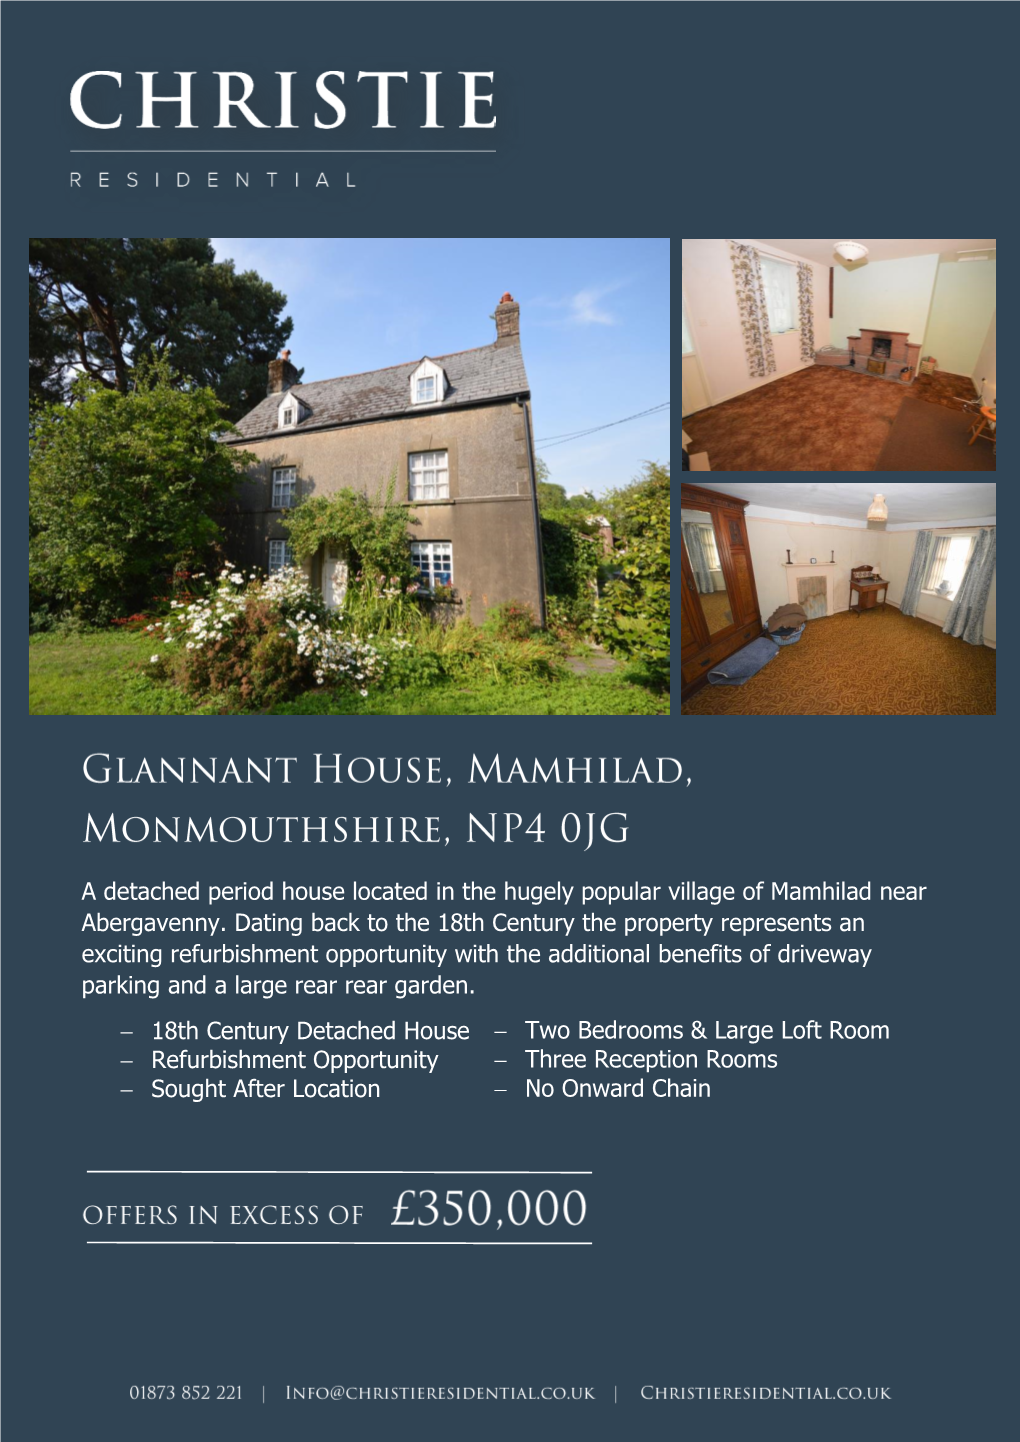 A Detached Period House Located in the Hugely Popular Village of Mamhilad Near Abergavenny